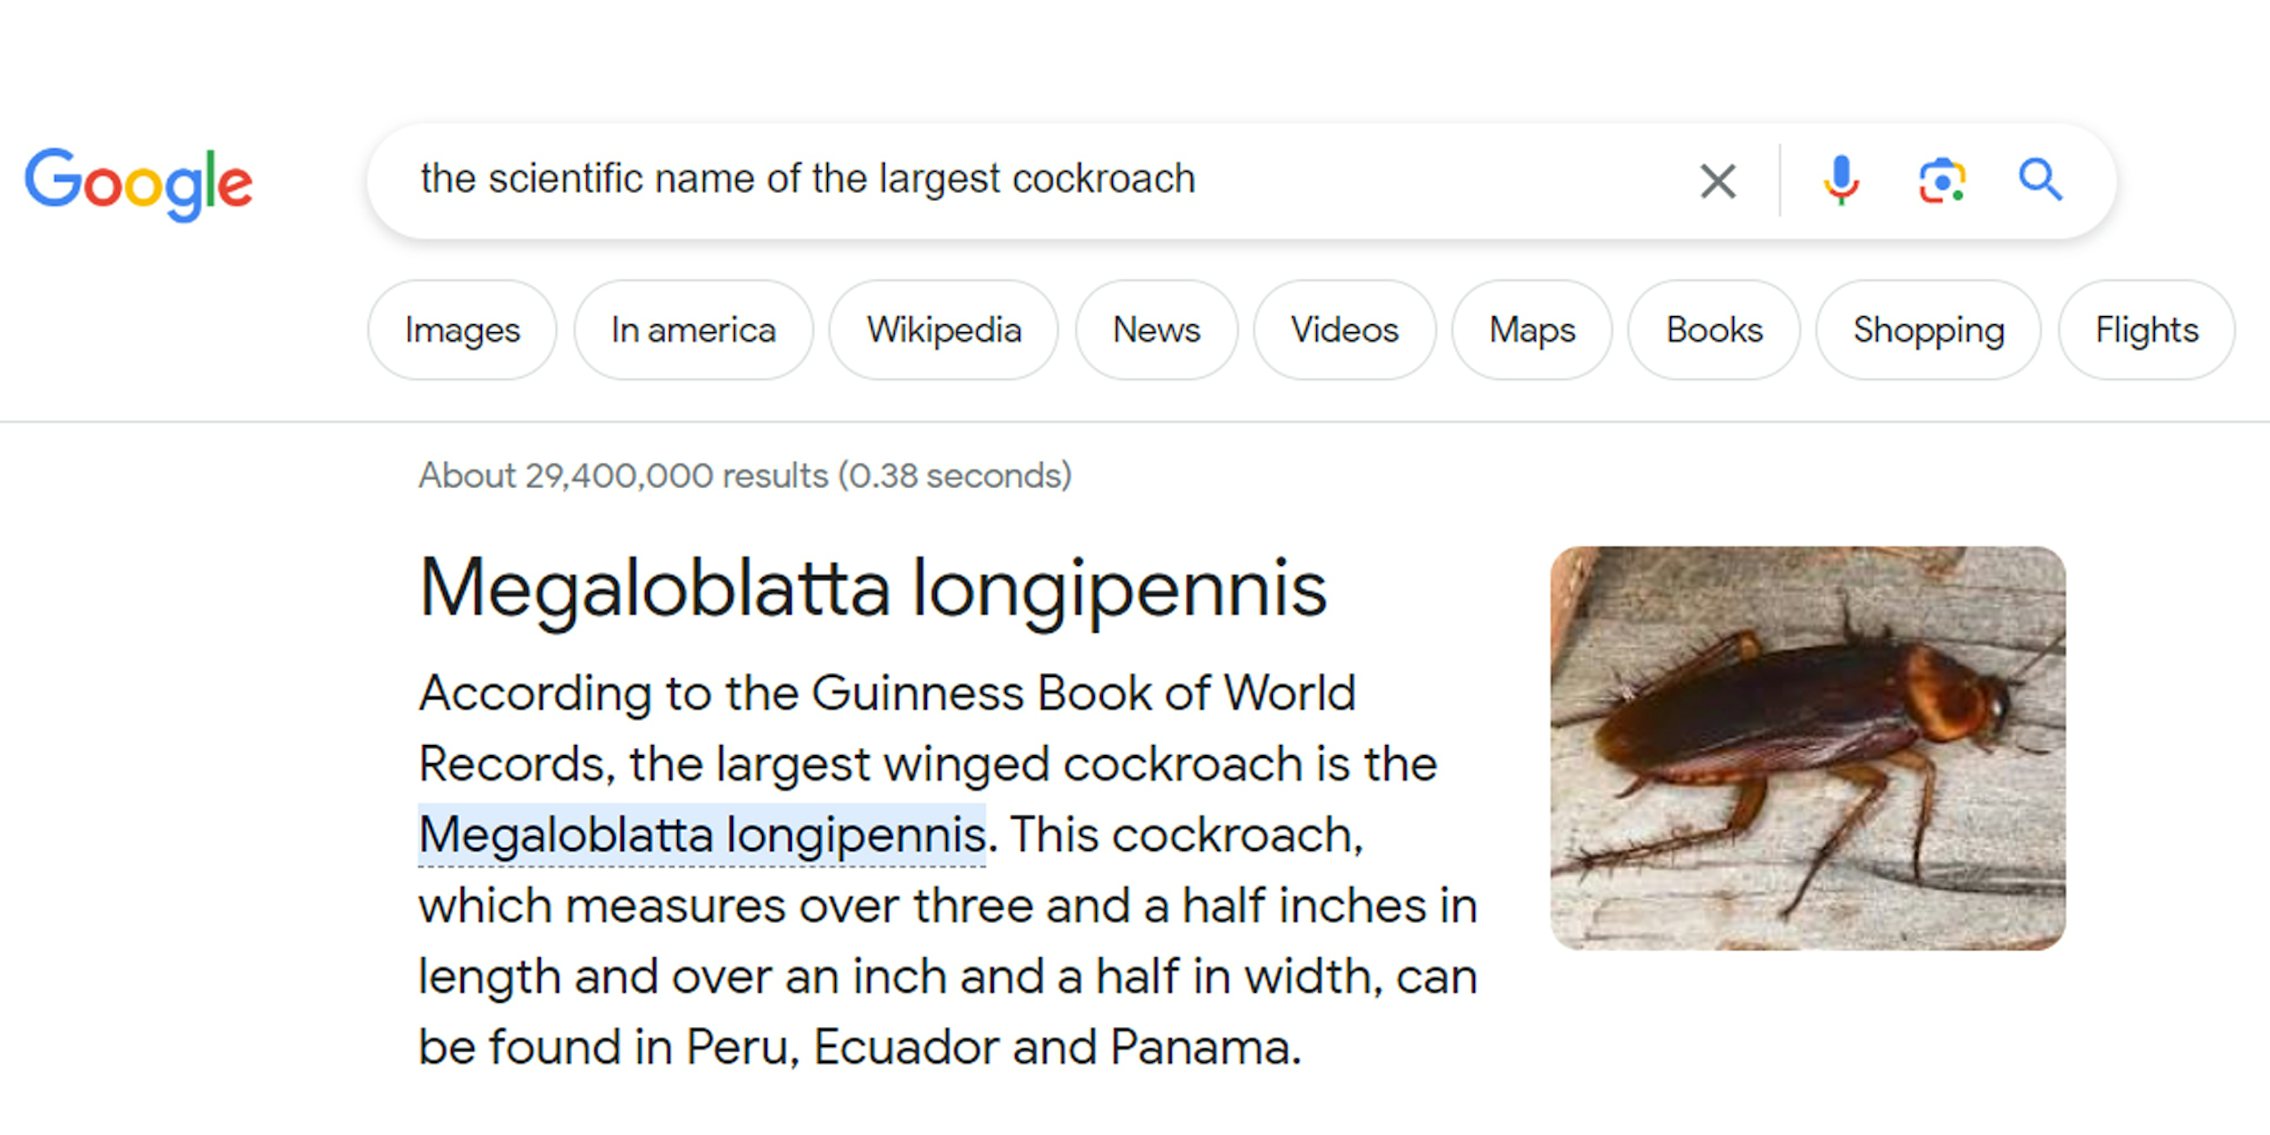 Google search for 'the scientific name of the largest cockroach Megaloblatta longipennis' with image of cockroach